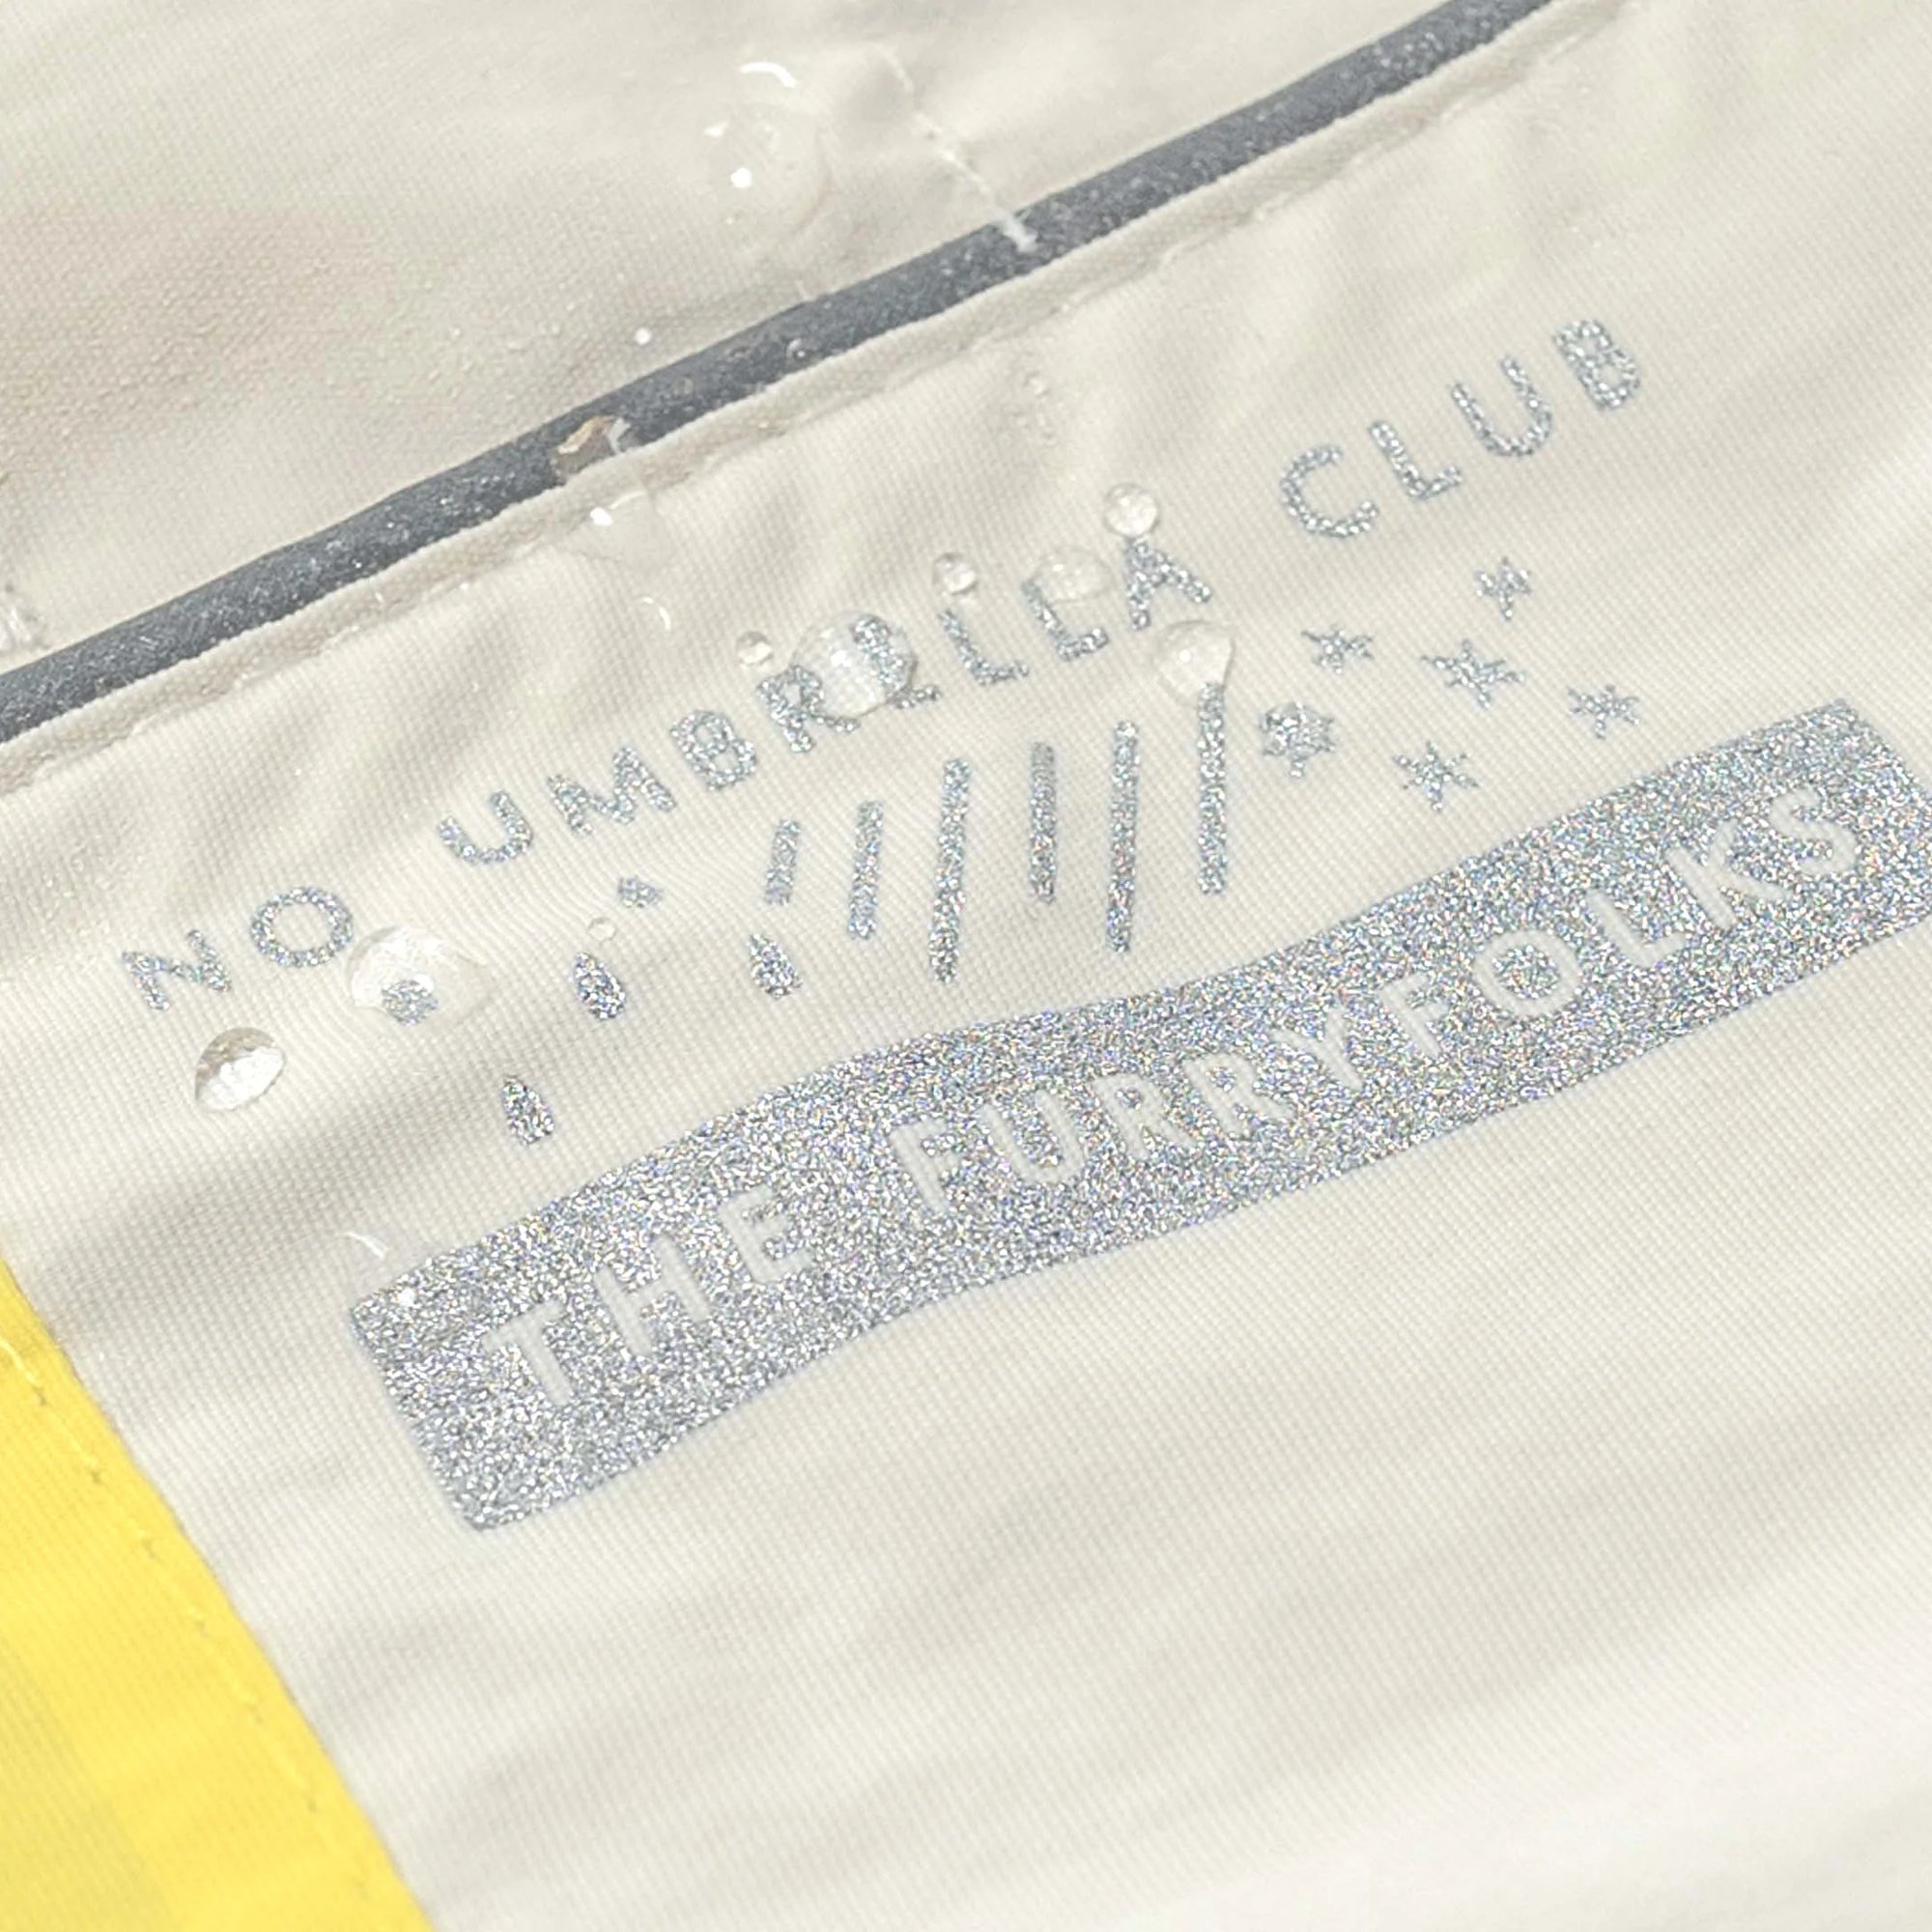 Water-resistant dog coat detail with 'The Furryfolks' logo and 'No Umbrella Club' print.